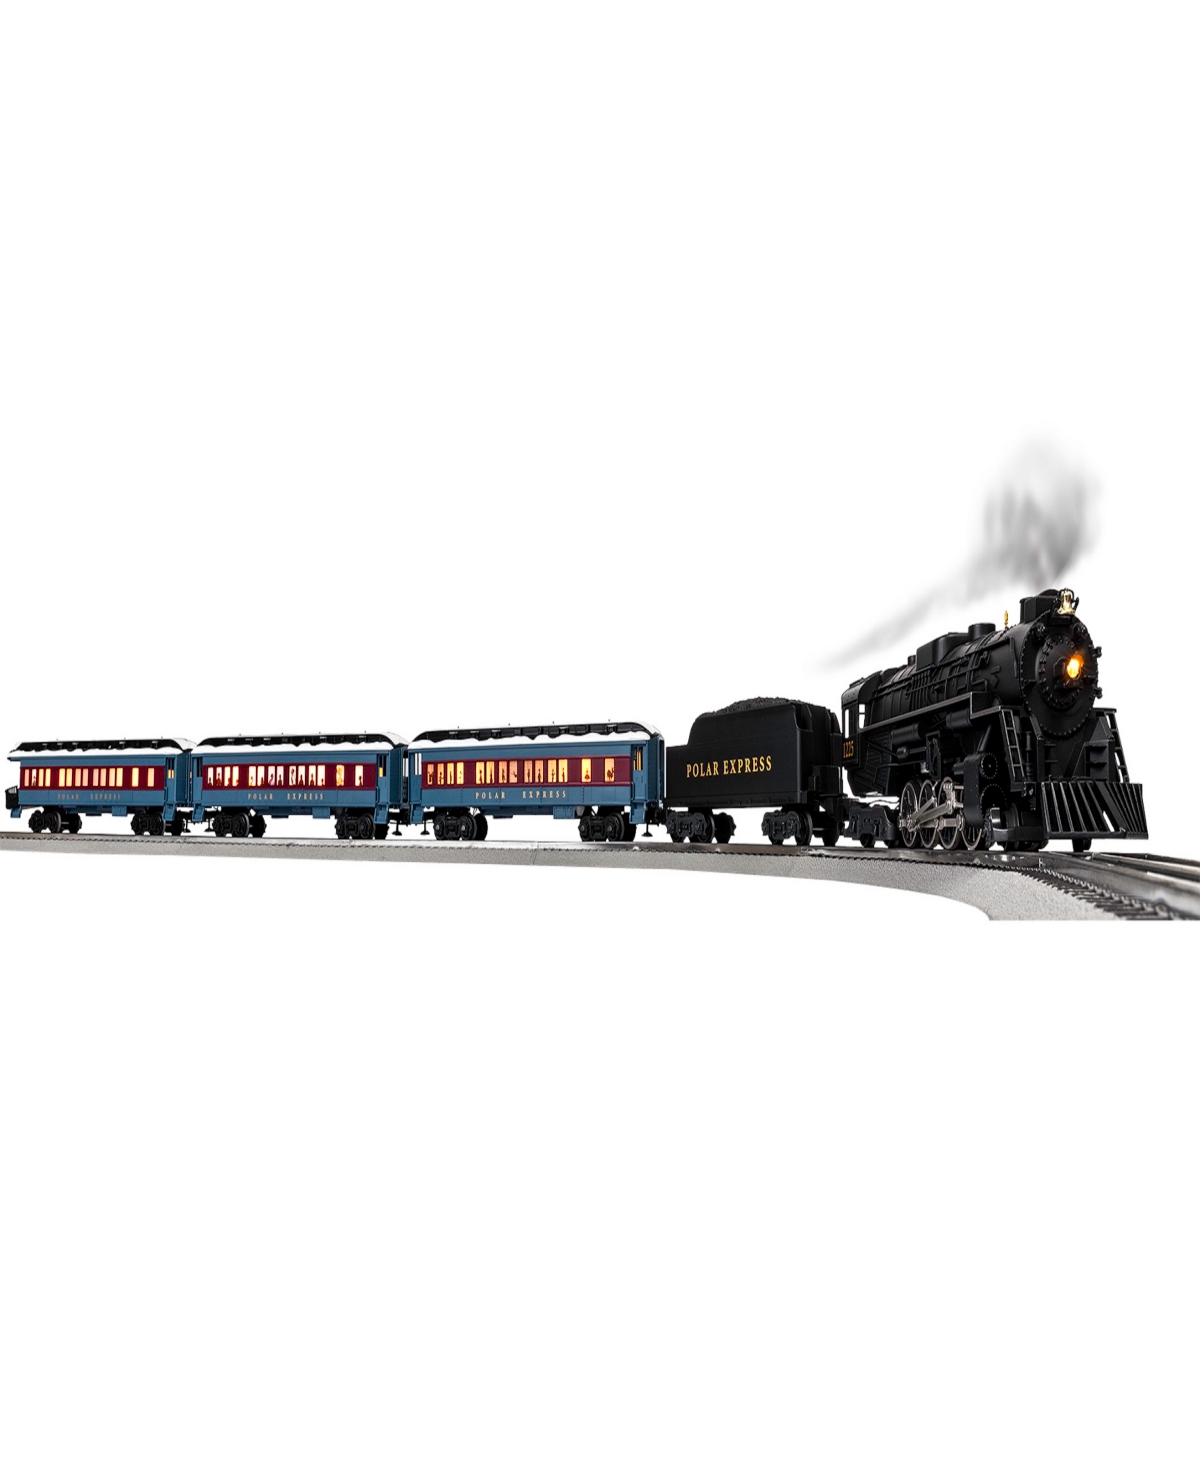 Shop Lionel The Polar Express Lionchief Bluetooth 5.0 Train Set With Remote In Multi